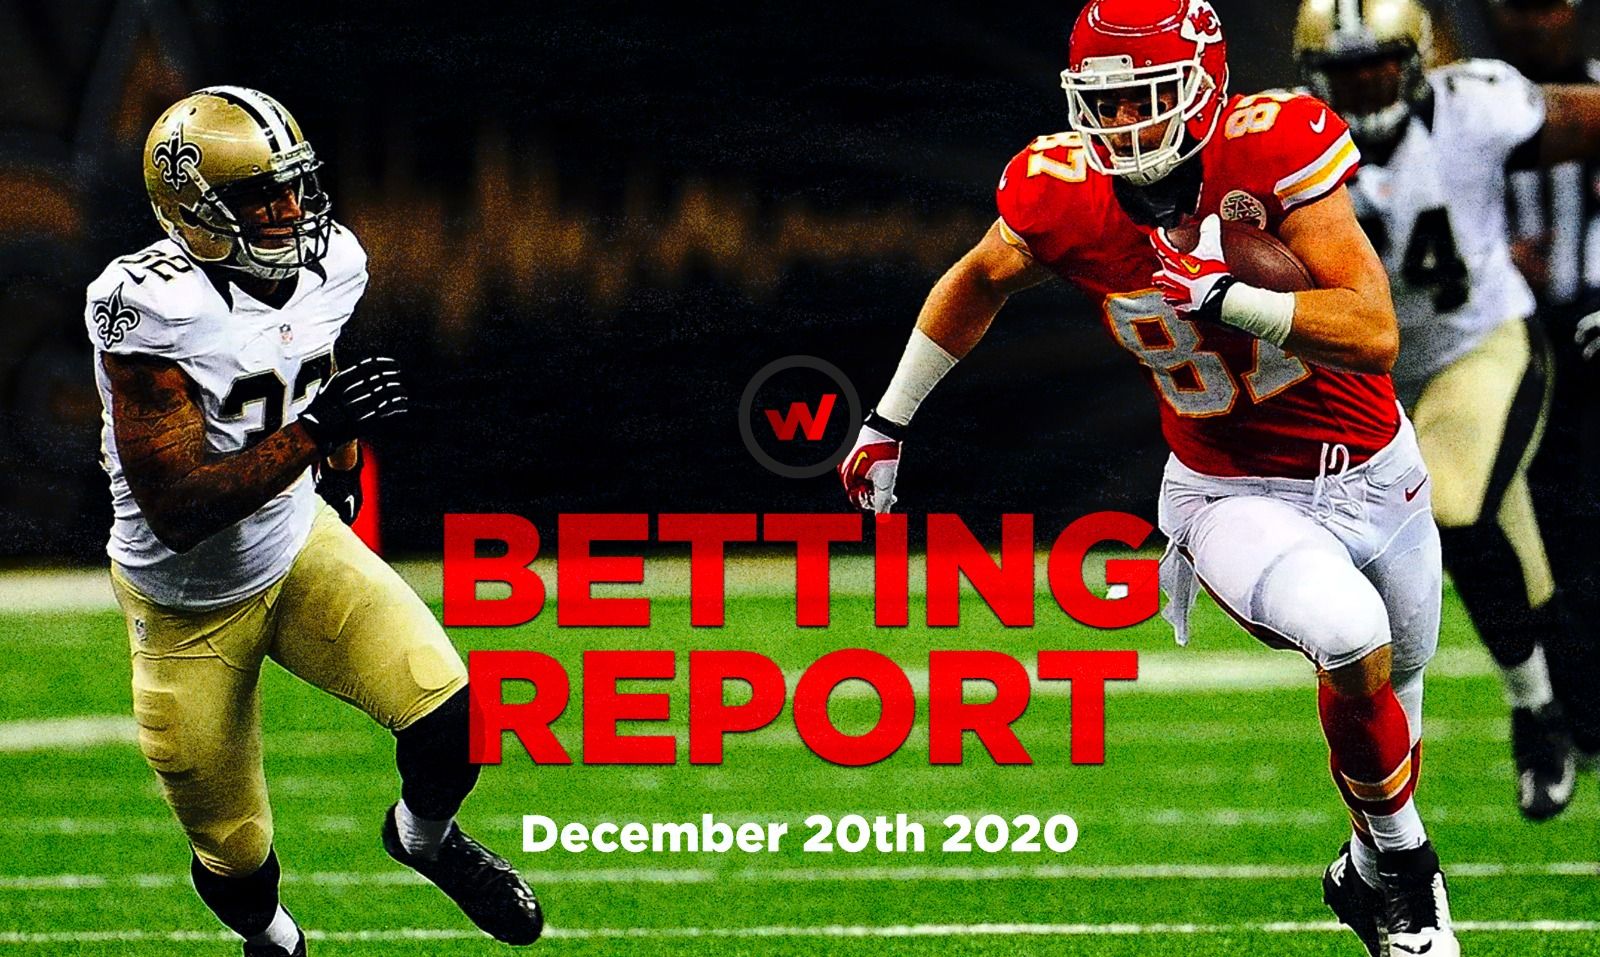 Wagerr Betting Report: December 20th